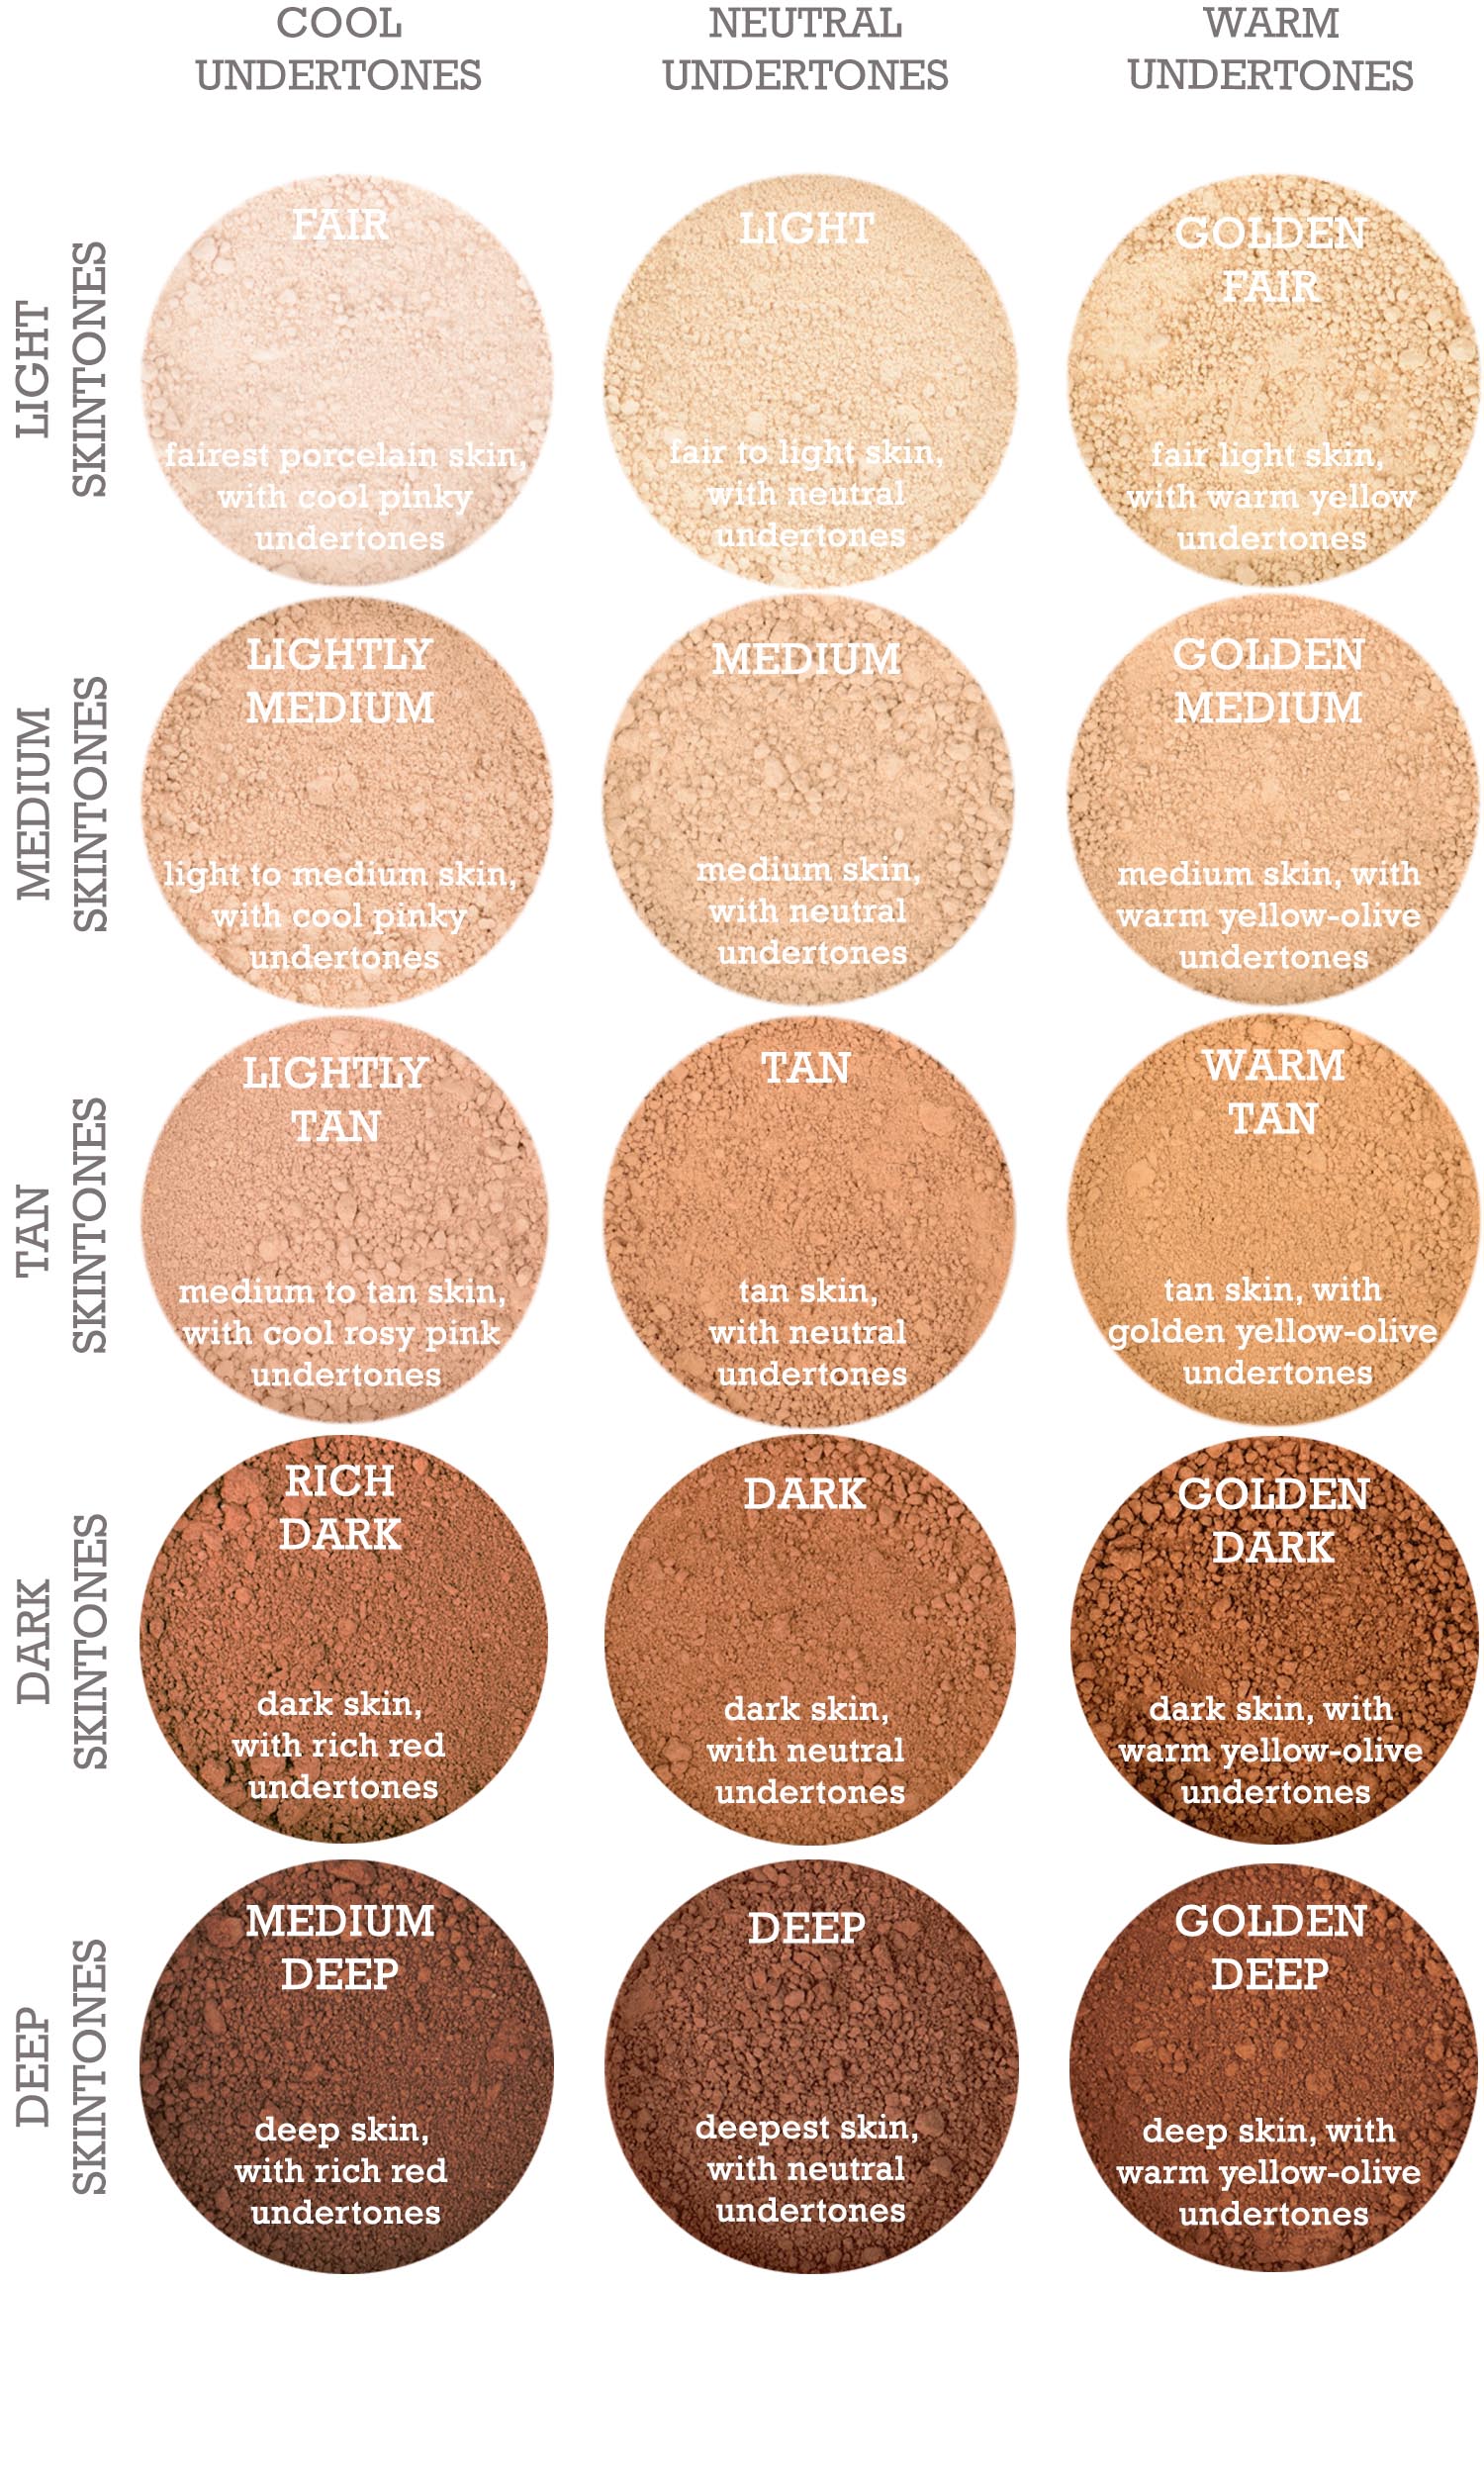 Honeypie Minerals Foundation Shade Chart Skintone and Undertone 15 Shades Available Natural Vegan Makeup